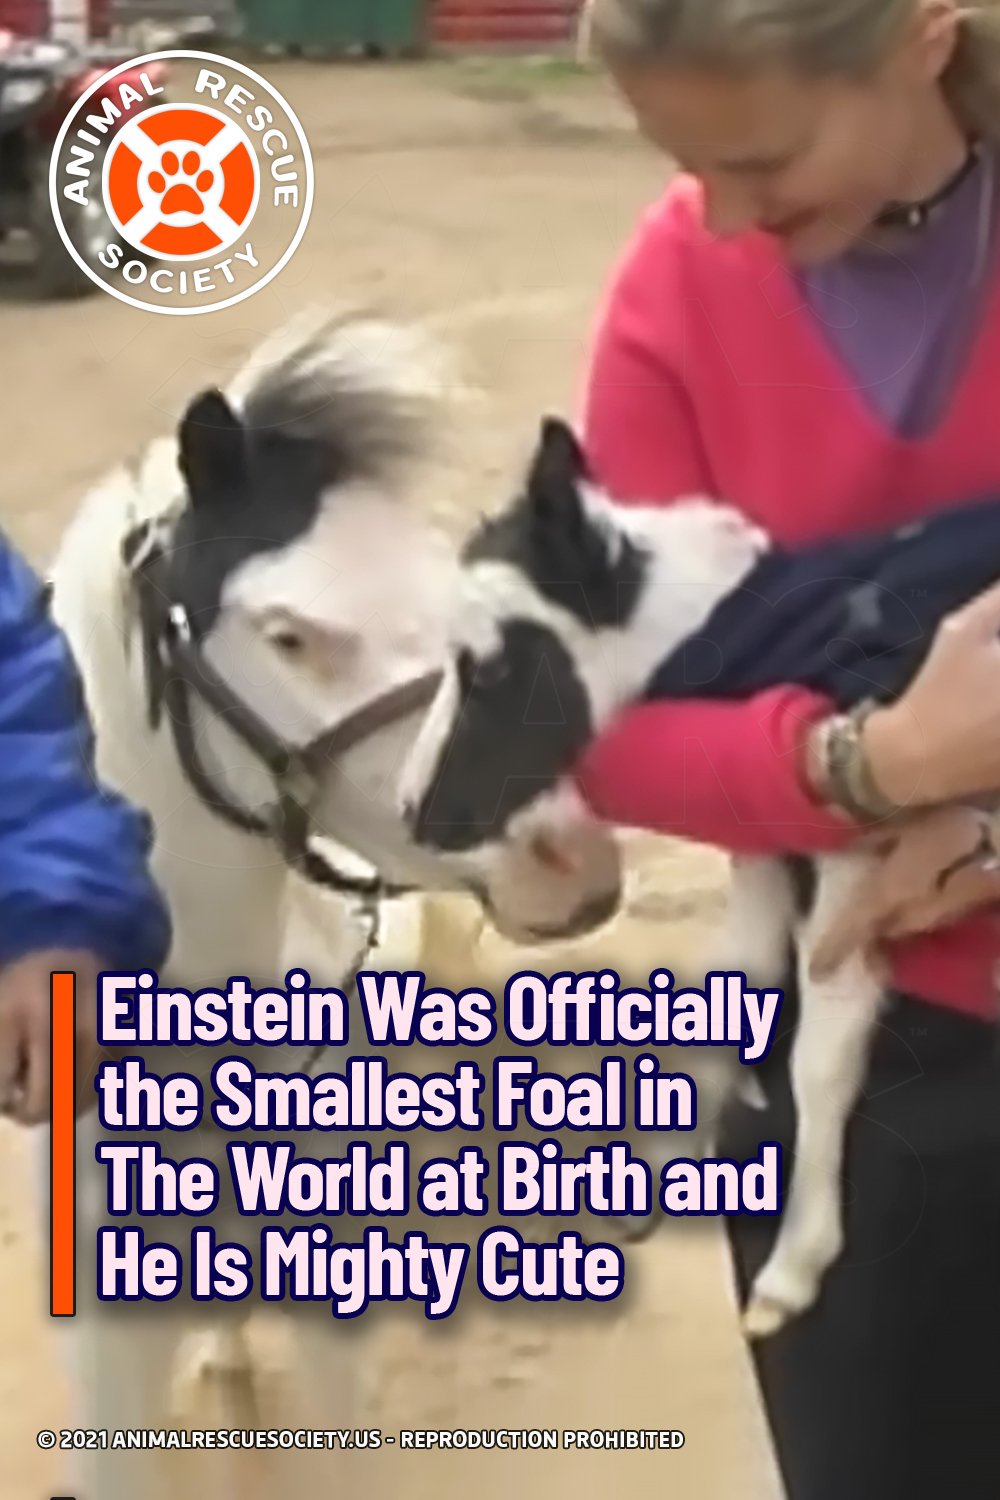 Einstein Was Officially the Smallest Foal in The World at Birth and He Is Mighty Cute